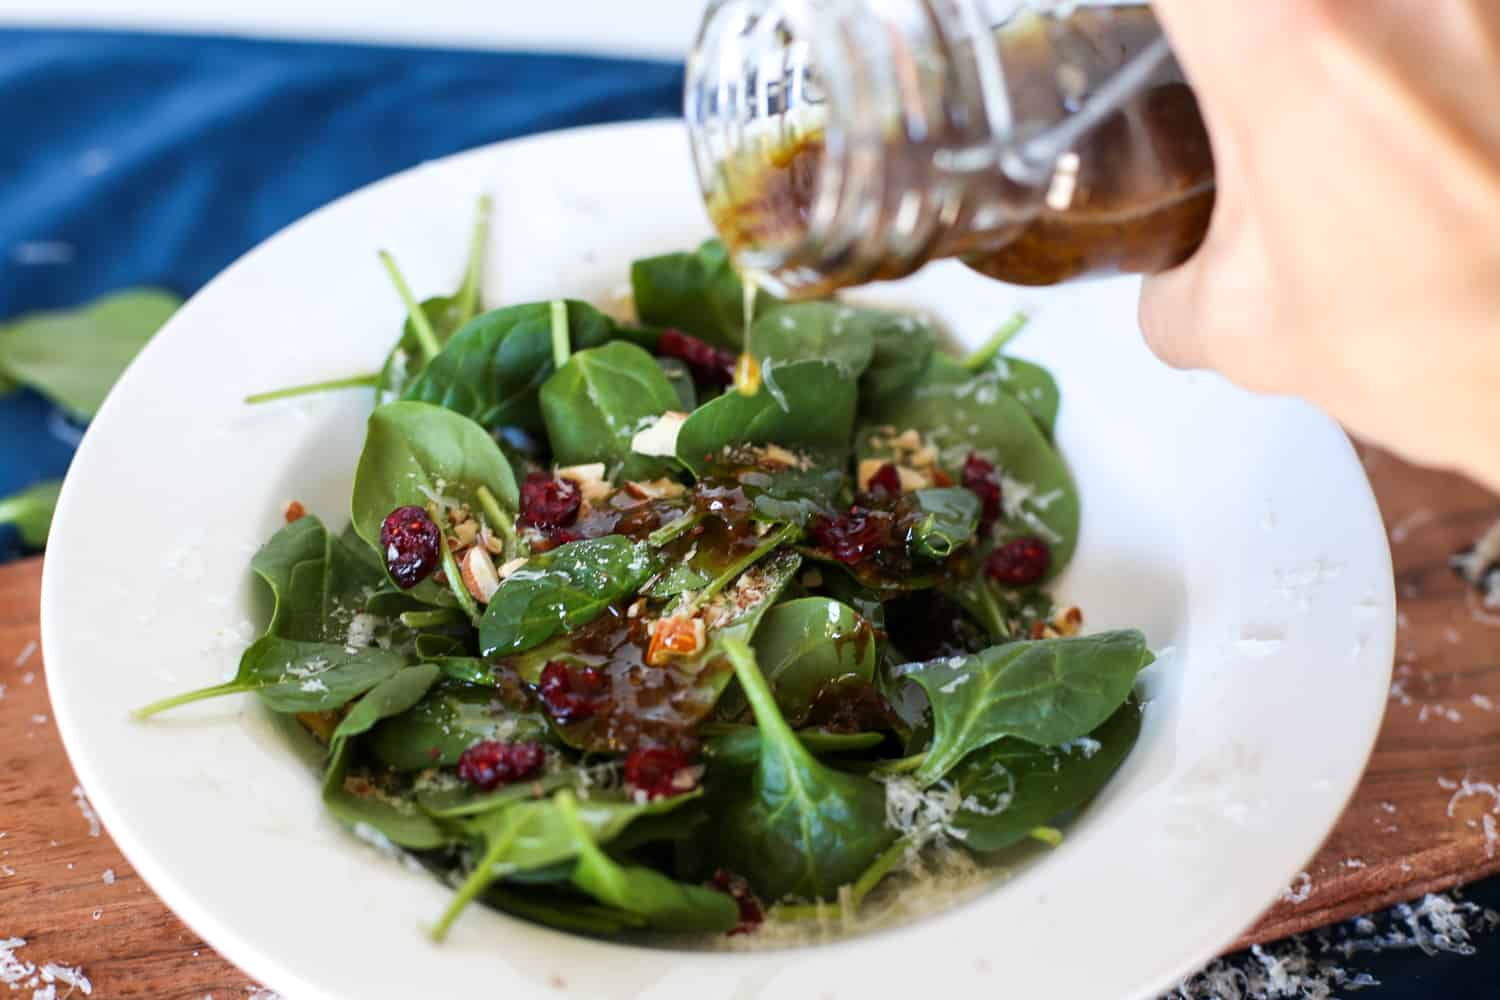 Parmesan Balsamic Vinaigrette being poured over a spinach salad.